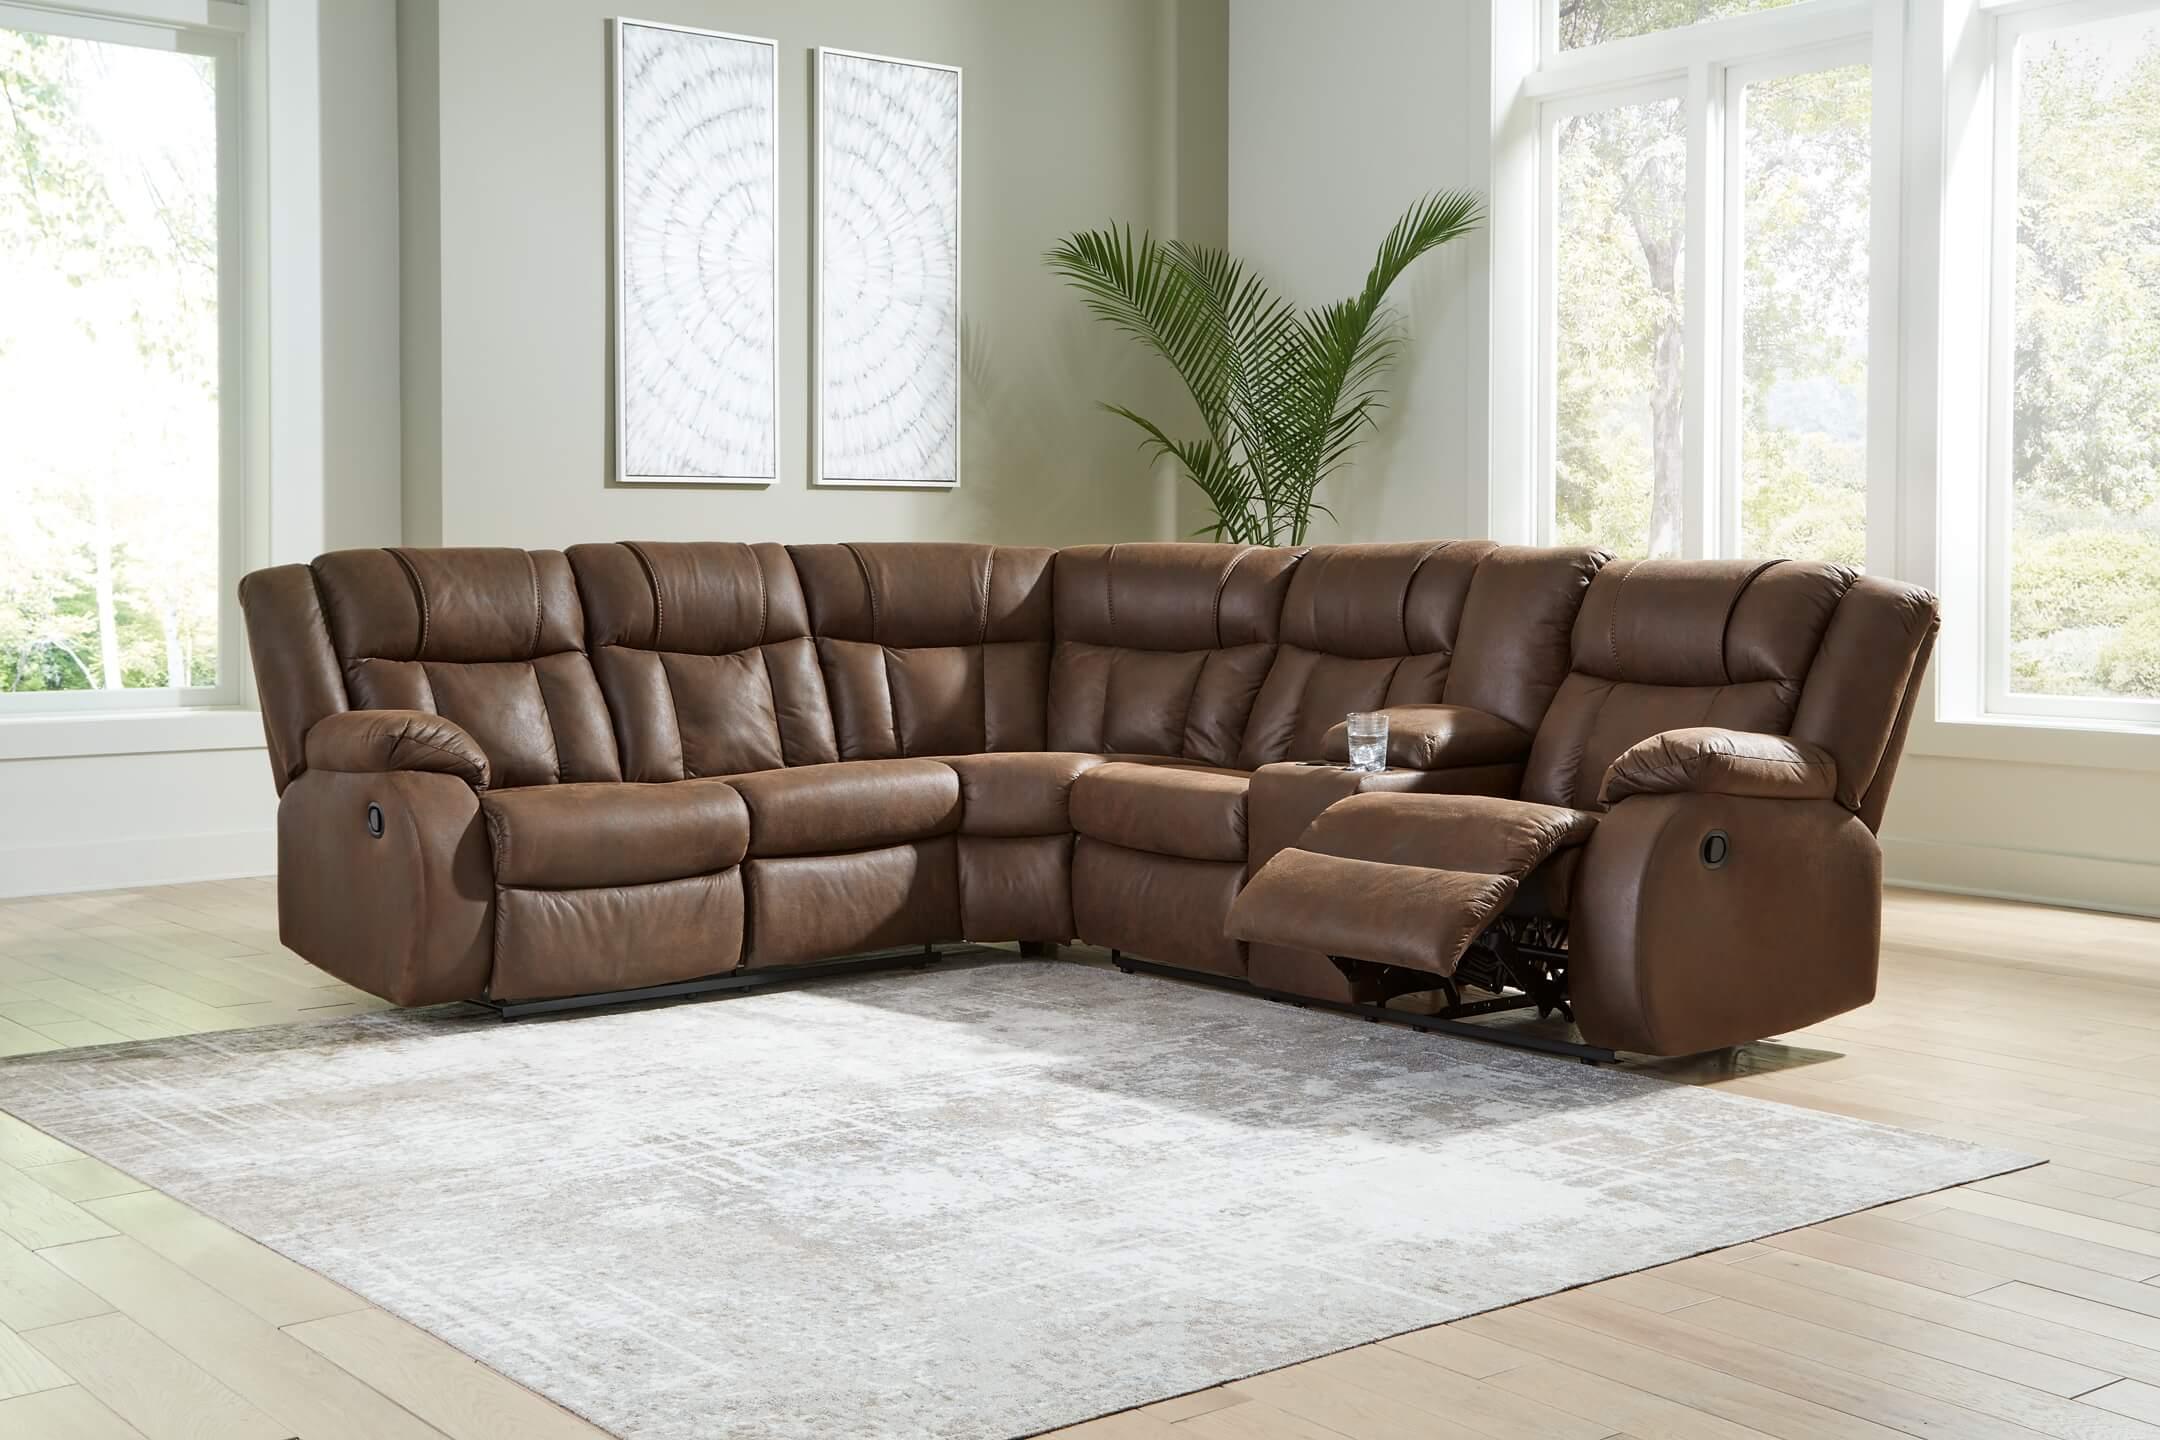 Trail Boys 2-Piece Reclining Sectional 82703S1 Black/Gray Contemporary Motion Sectionals